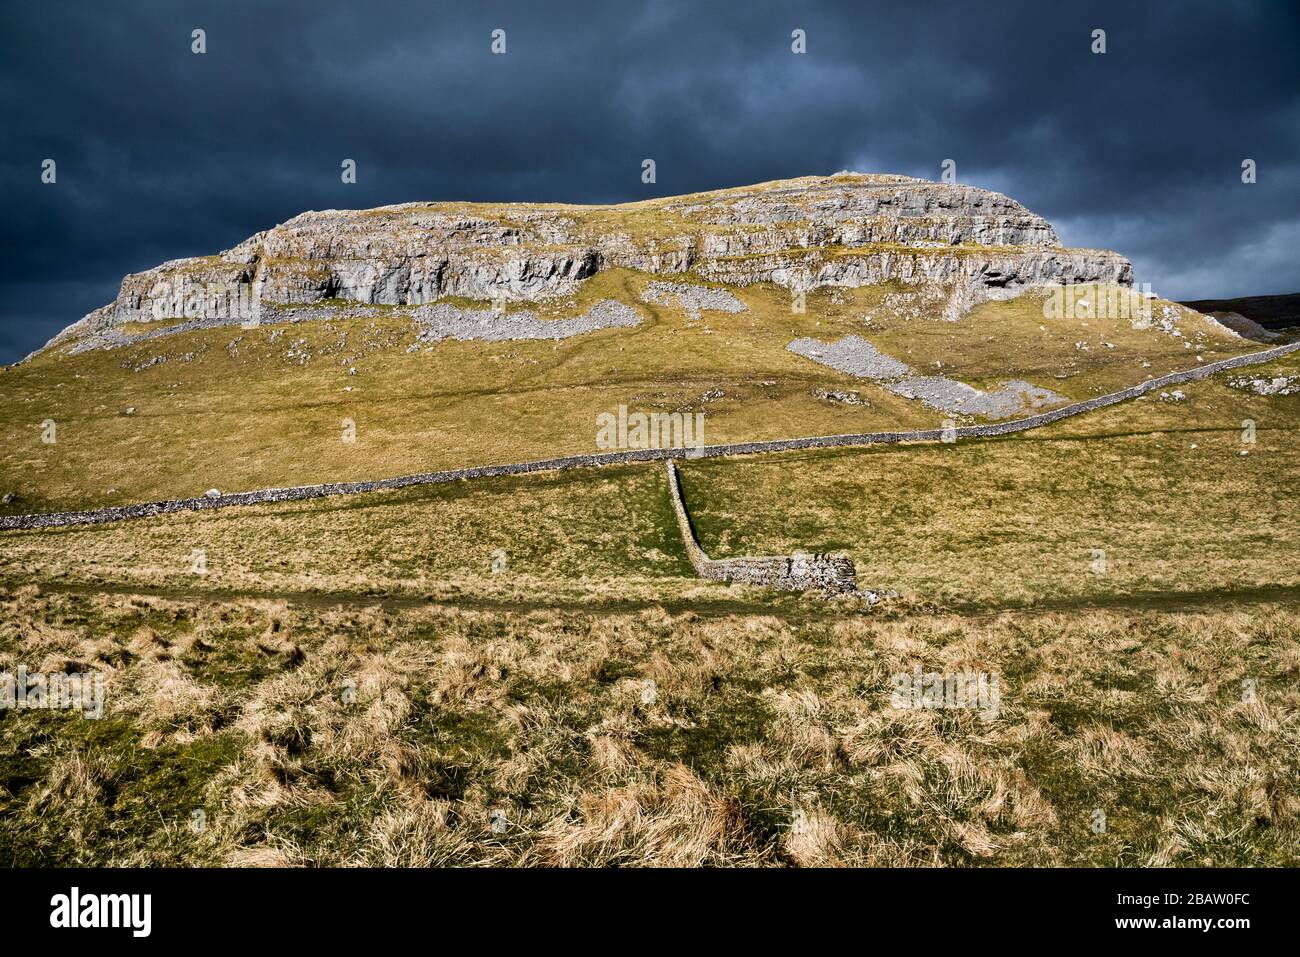 Yorkshire Dales National Park, Settle, North Yorkshire. 29th Mar 2020. UK Weather: Spring in the Yorkshire Dales National Park. Bright sunlight illuminates Warrendale Knotts, a craggy limestone hill near Settle, North Yorkshire.Credit: John Bentley/Alamy Live News Stock Photo